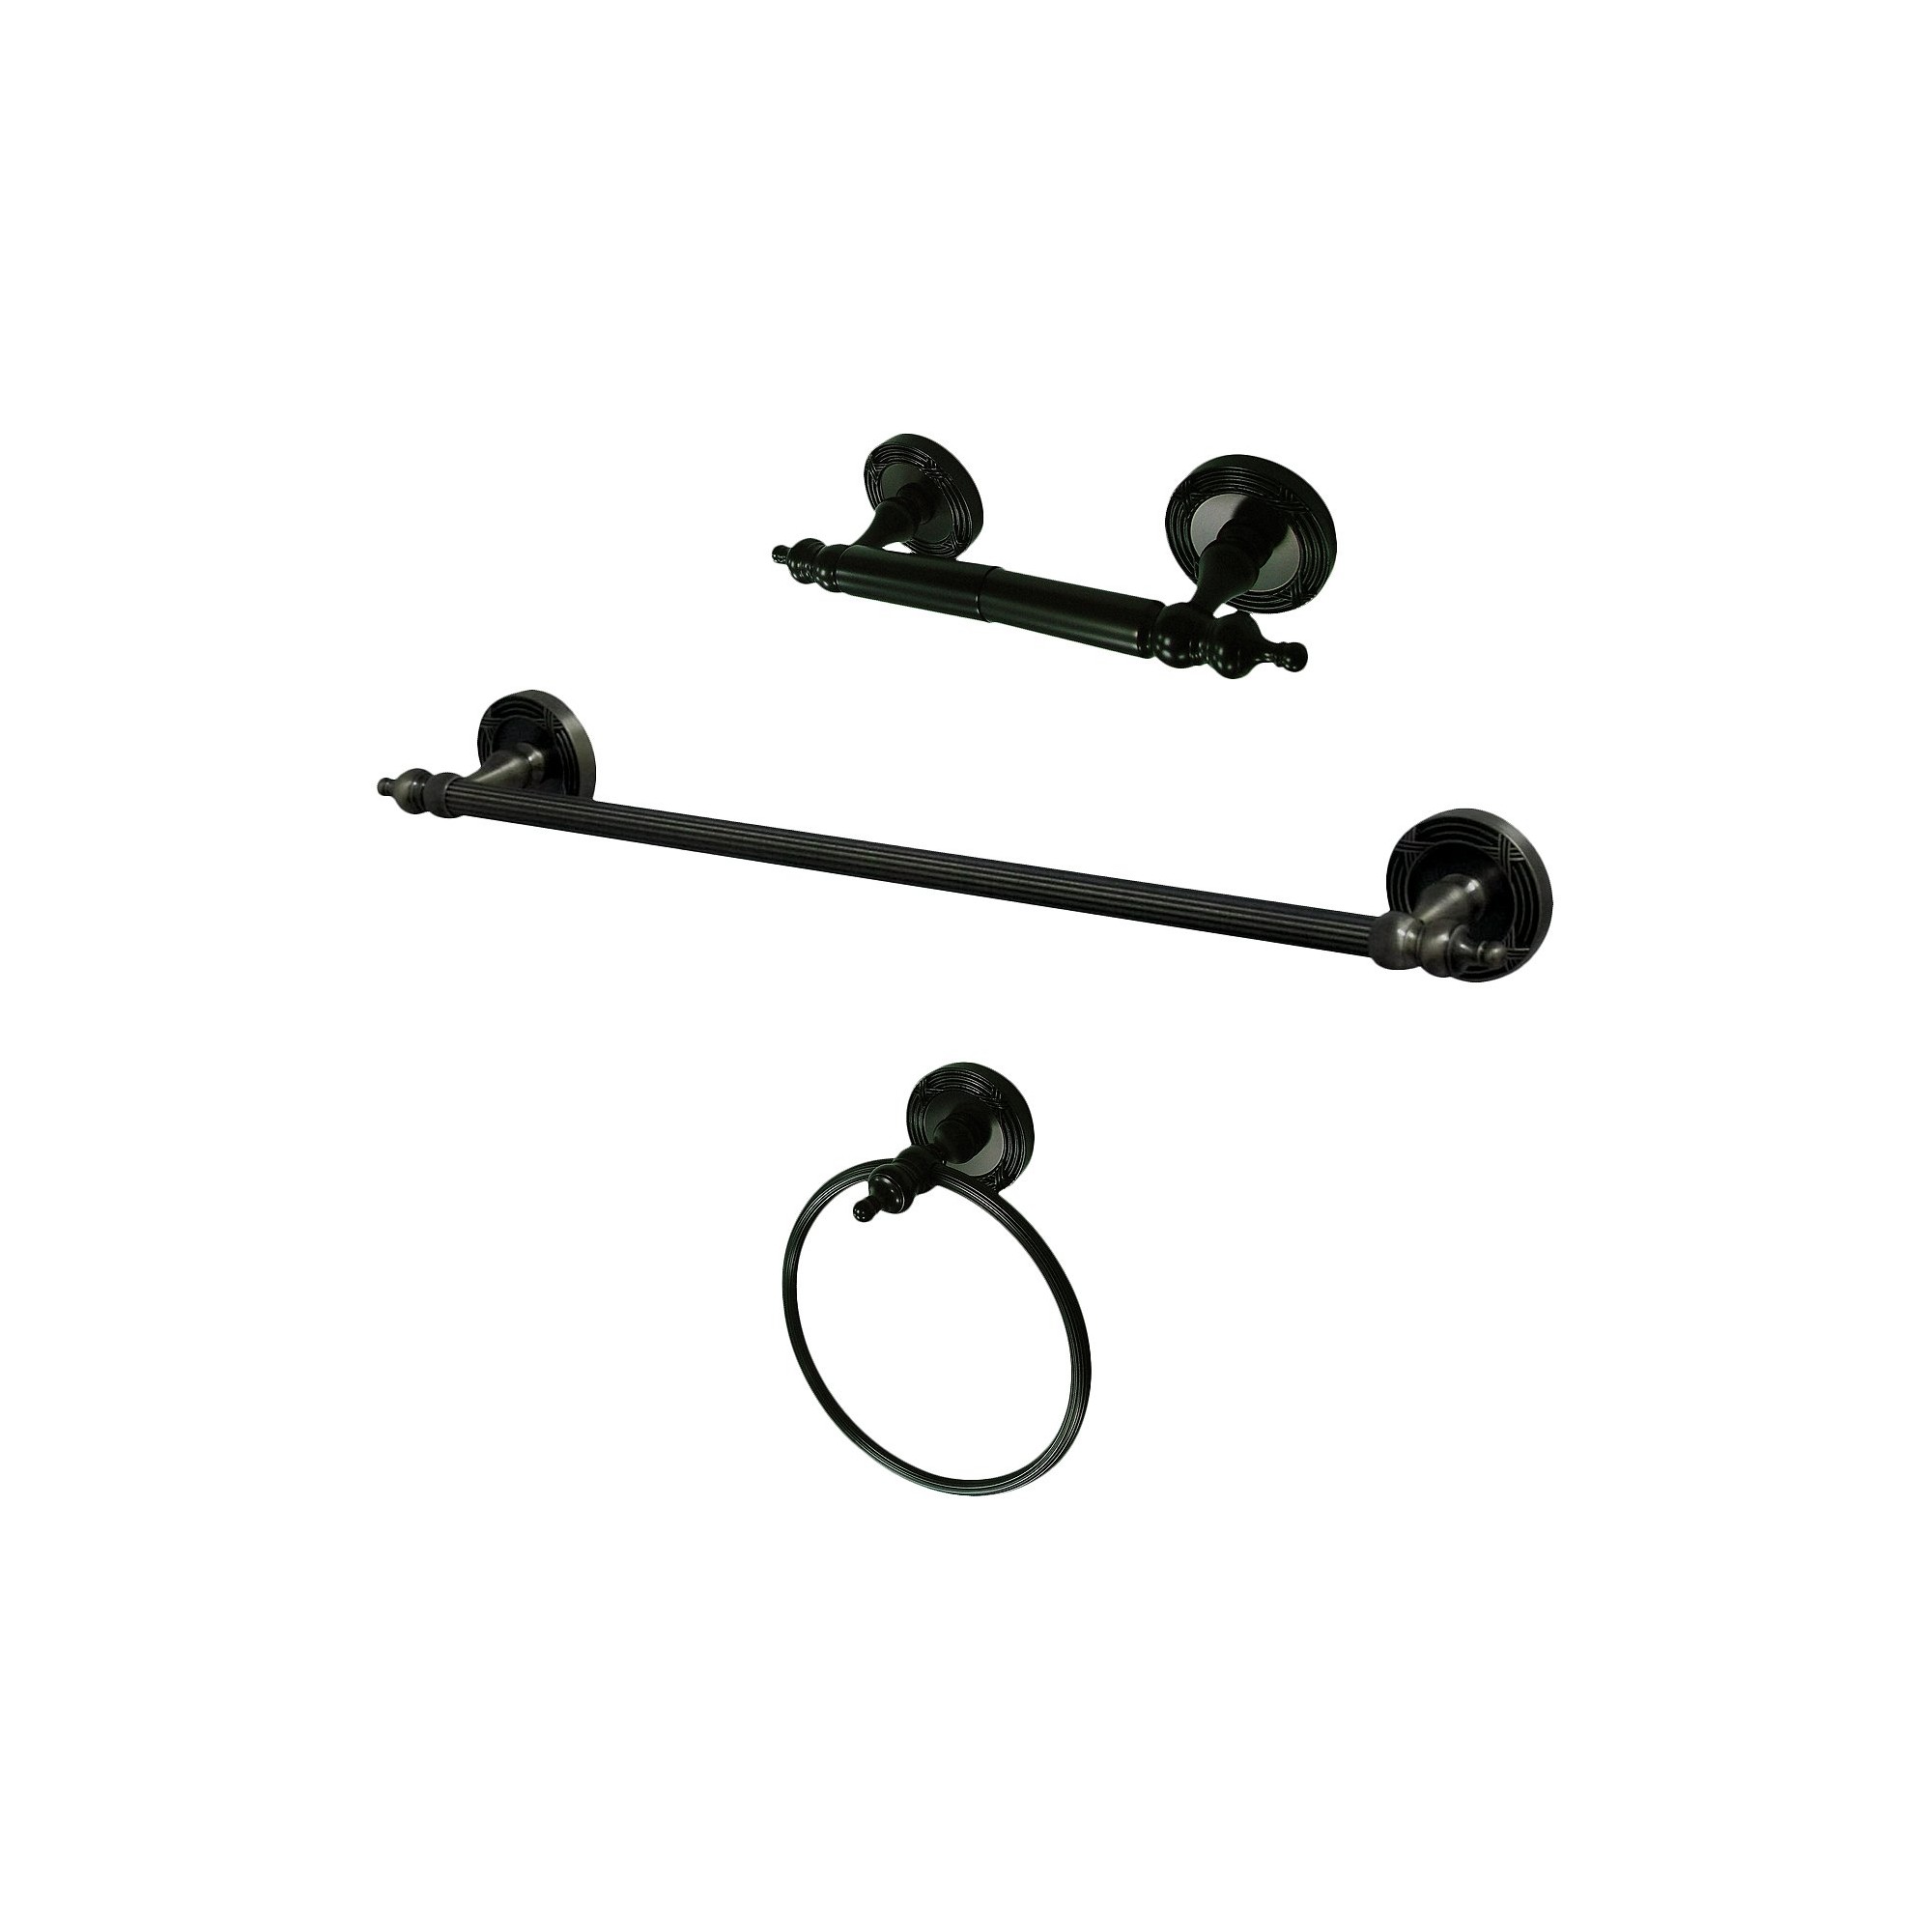 Etched Solid Brass Oil Rubbed Bronze 3-piece Towel Bar Bath Accessory Set - Kingston Brass